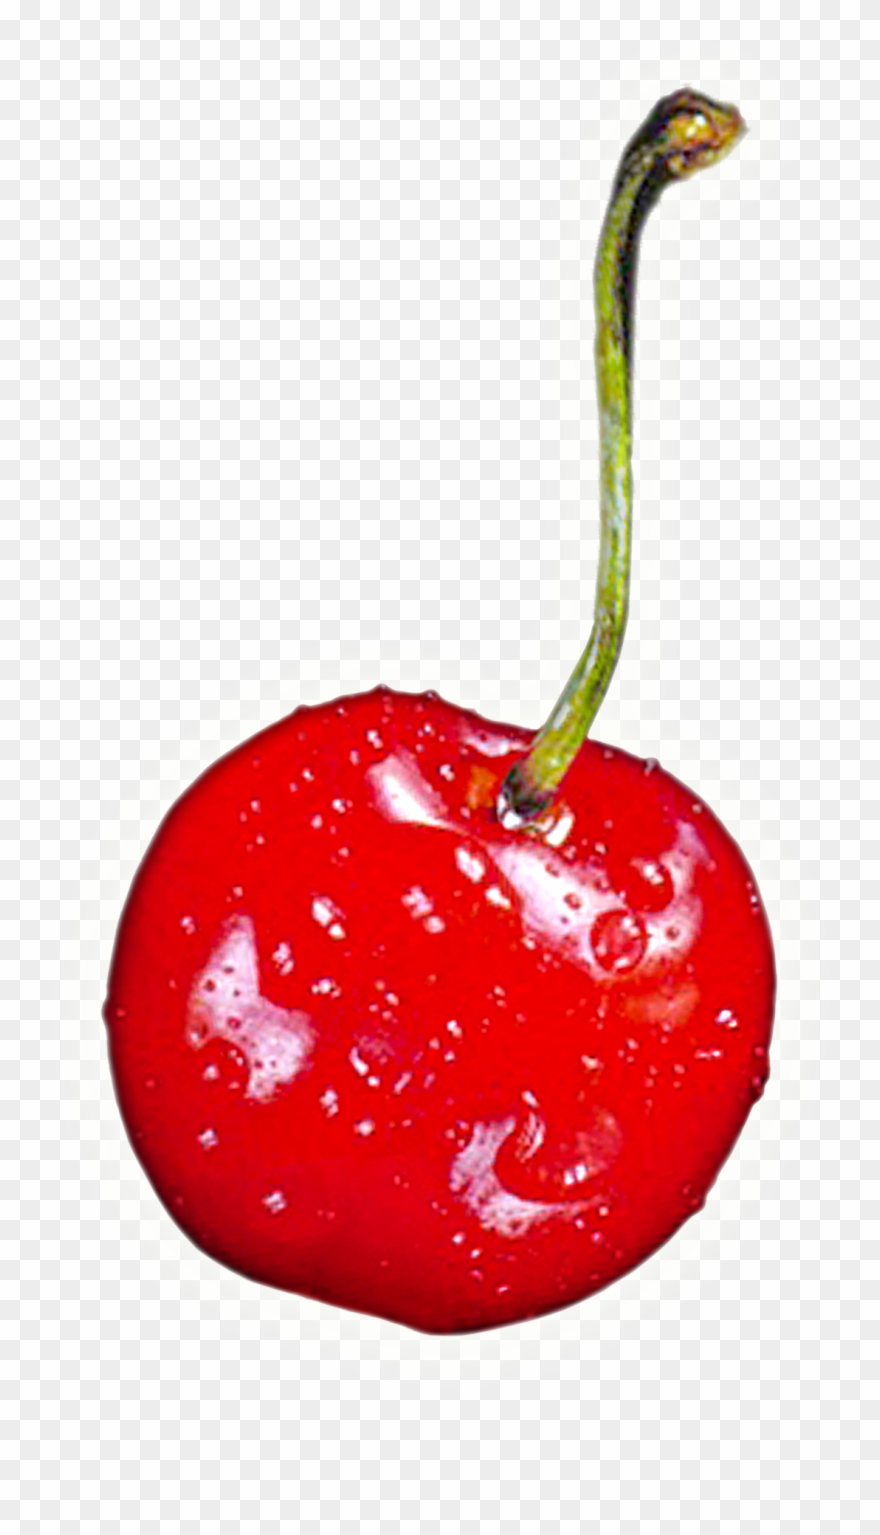 Cherry clipart one.